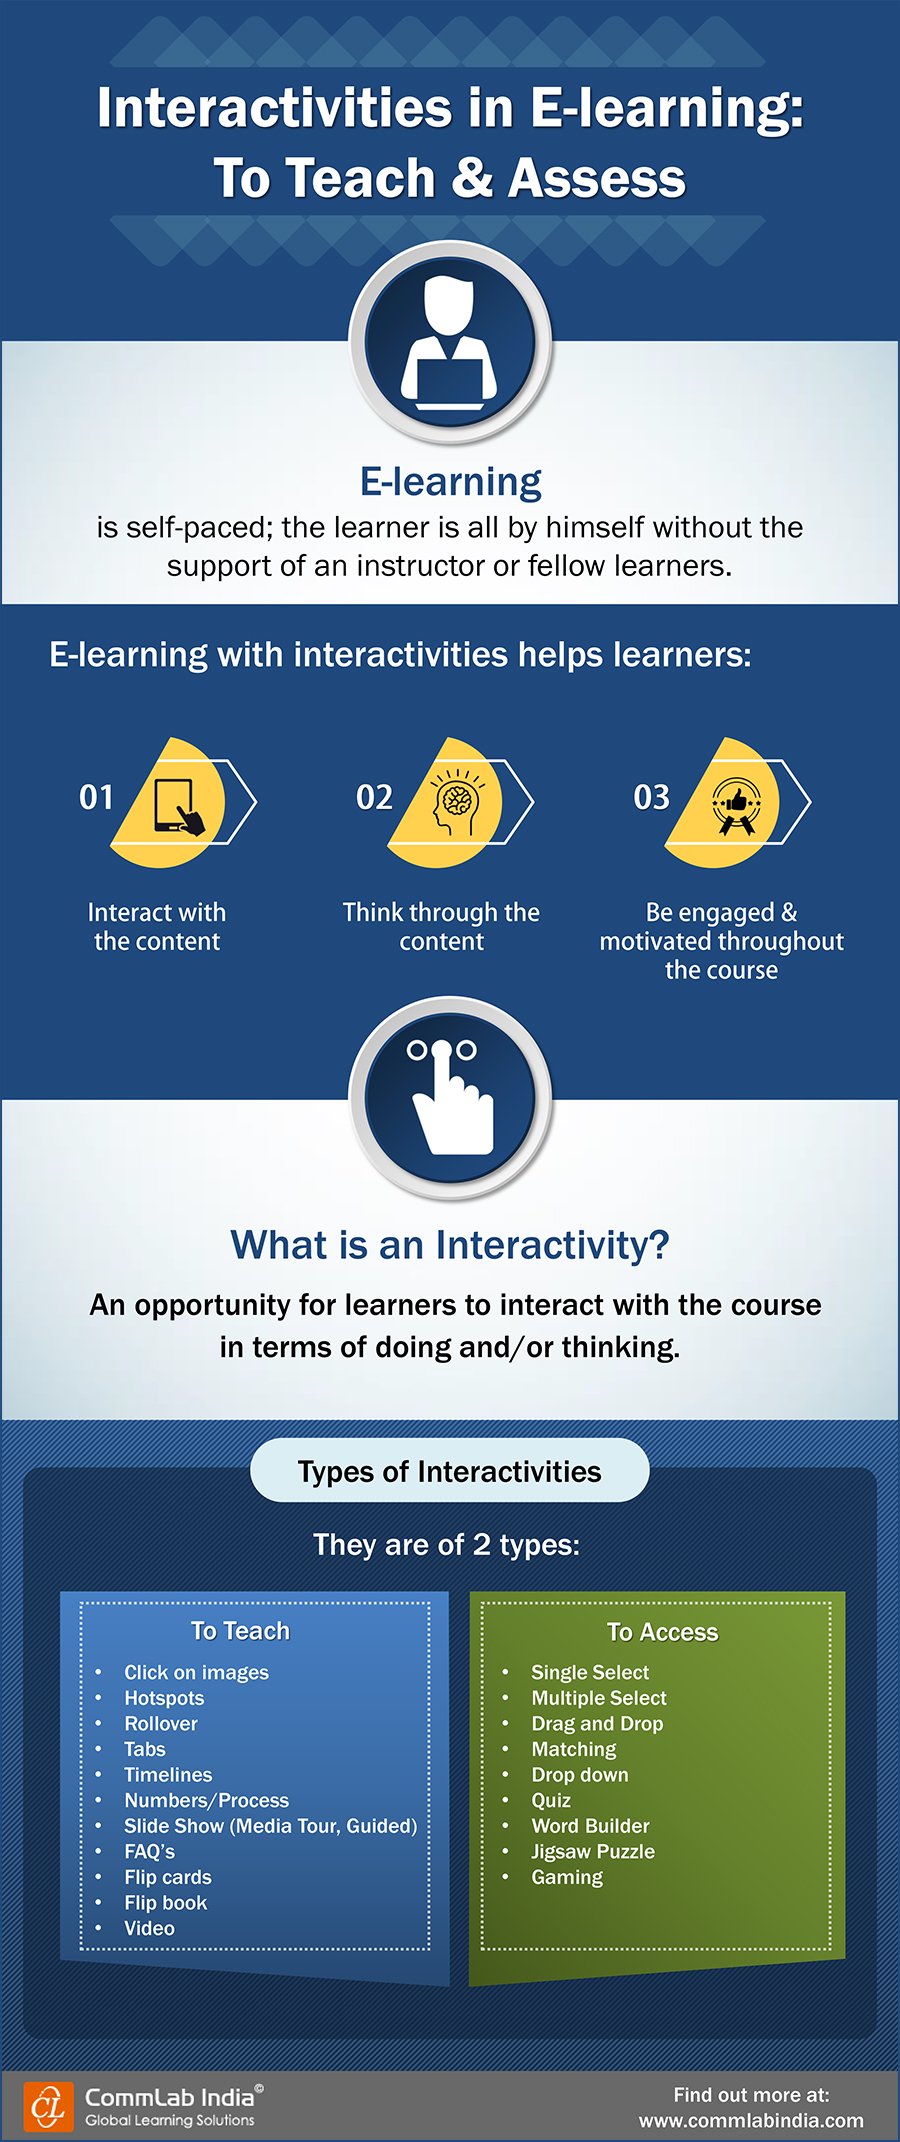 Interactivities in E-learning: To Teach & Assess [Infographic]